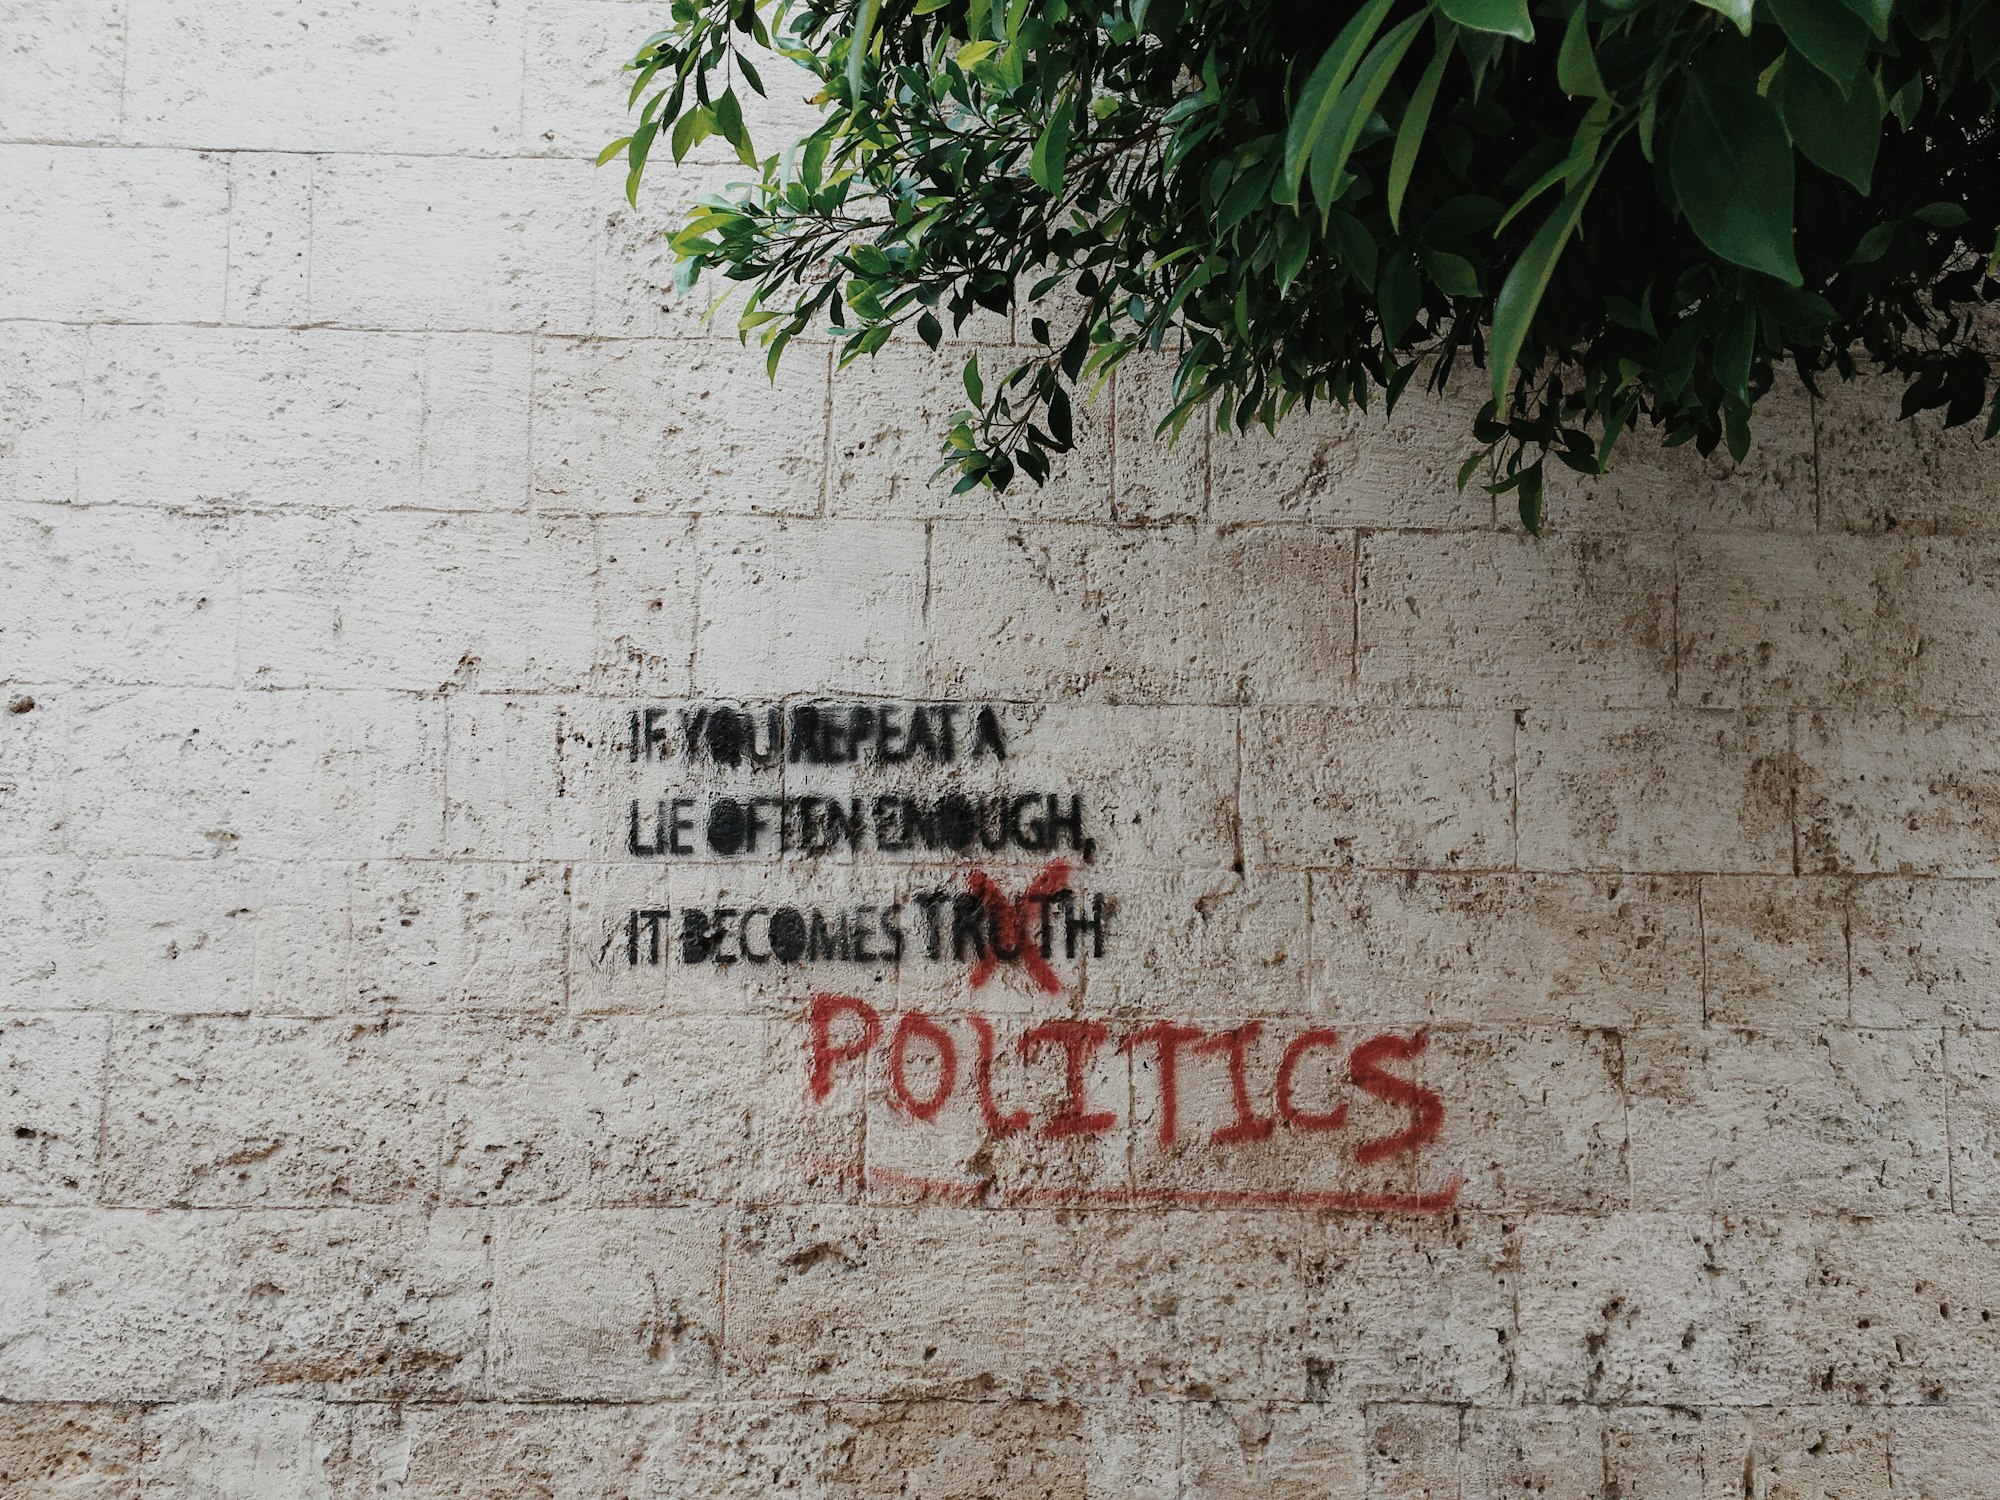 Political commentary on the streets of Gemmayze, East Beirut, Lebanon.